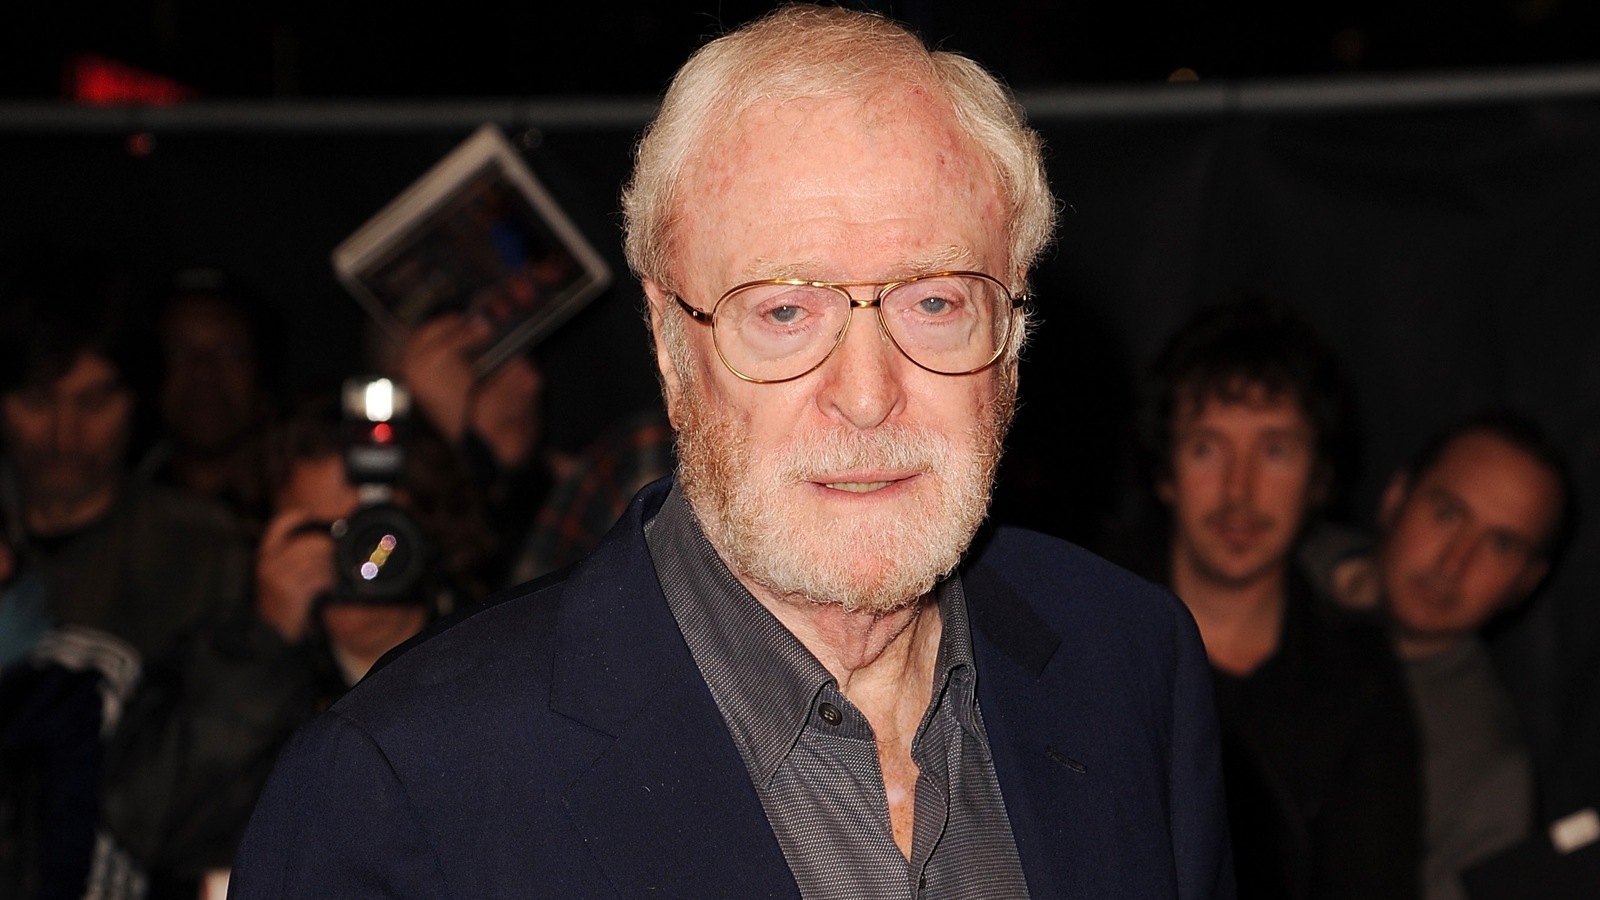 I Had No Money”, Michael Caine Recalls His Poor Childhood and the